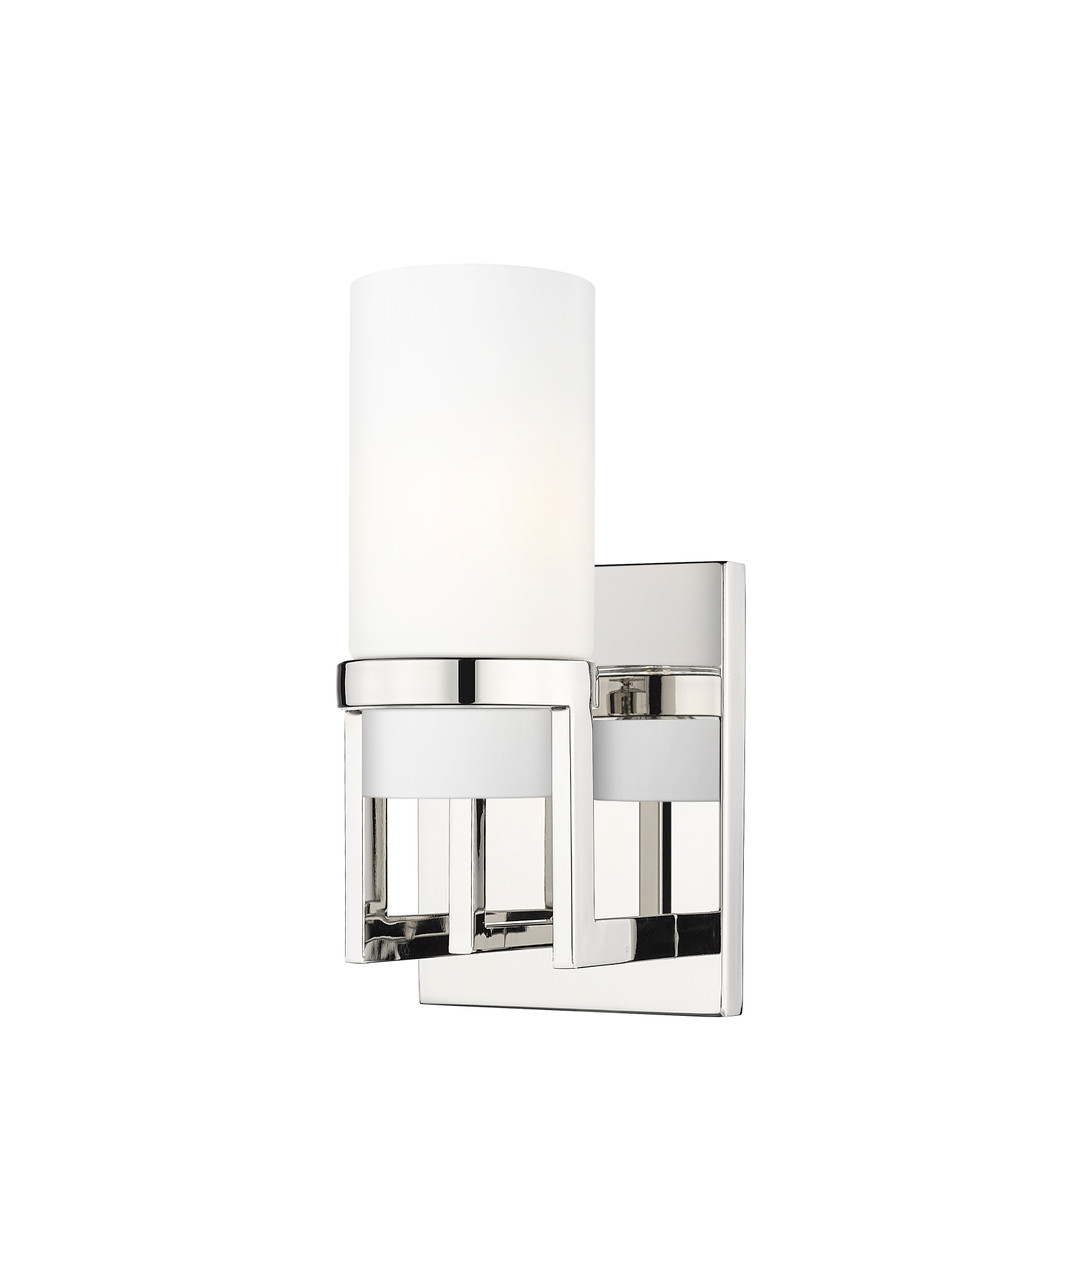 INNOVATIONS 426-1W-PN-G426-8WH Utopia 1 4.75 inch Sconce Polished Nickel